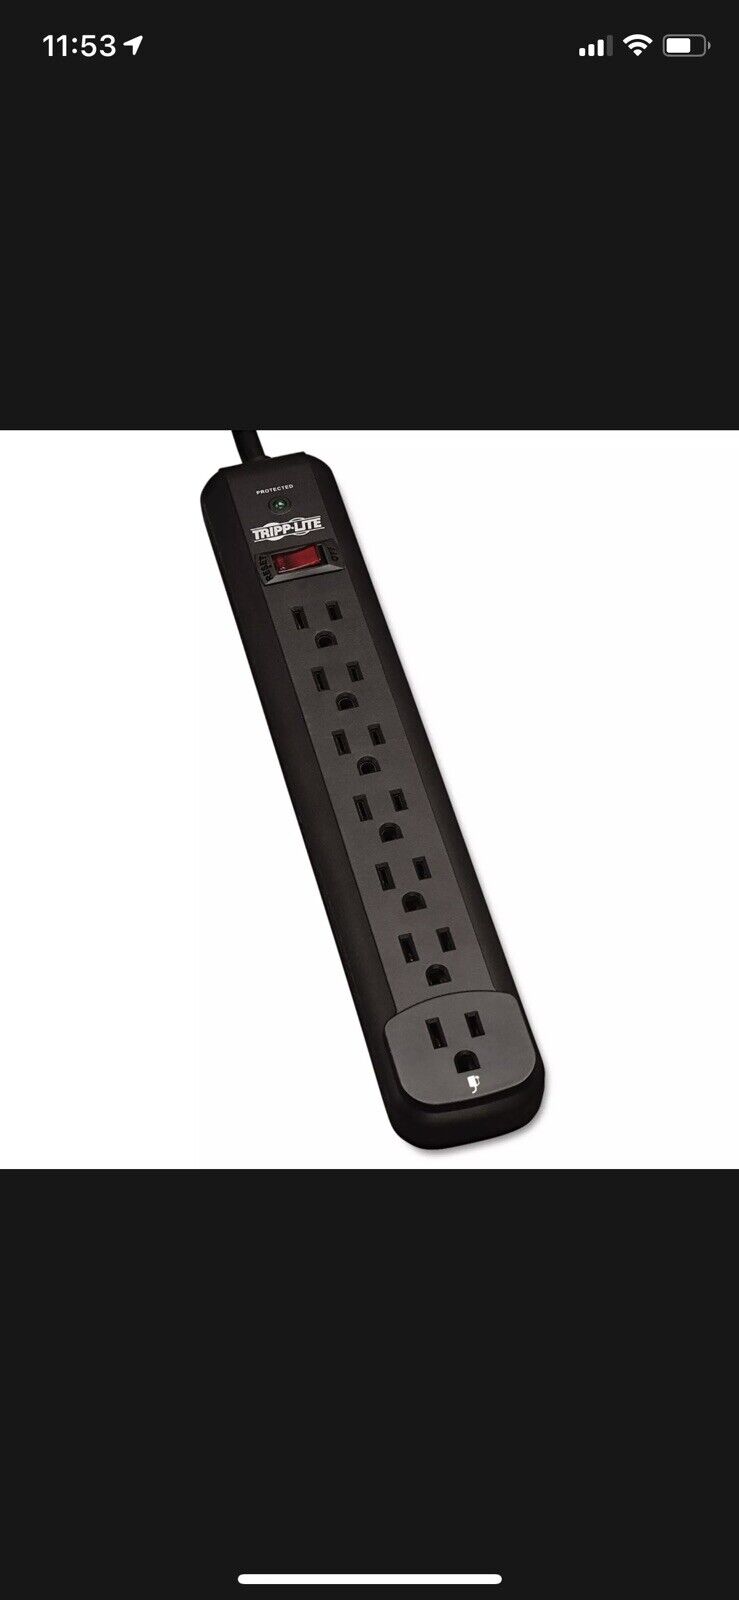 Tripp Lite 7 Outlet Surge Protector Power Strip, Extra Long 12ft Cord, Black